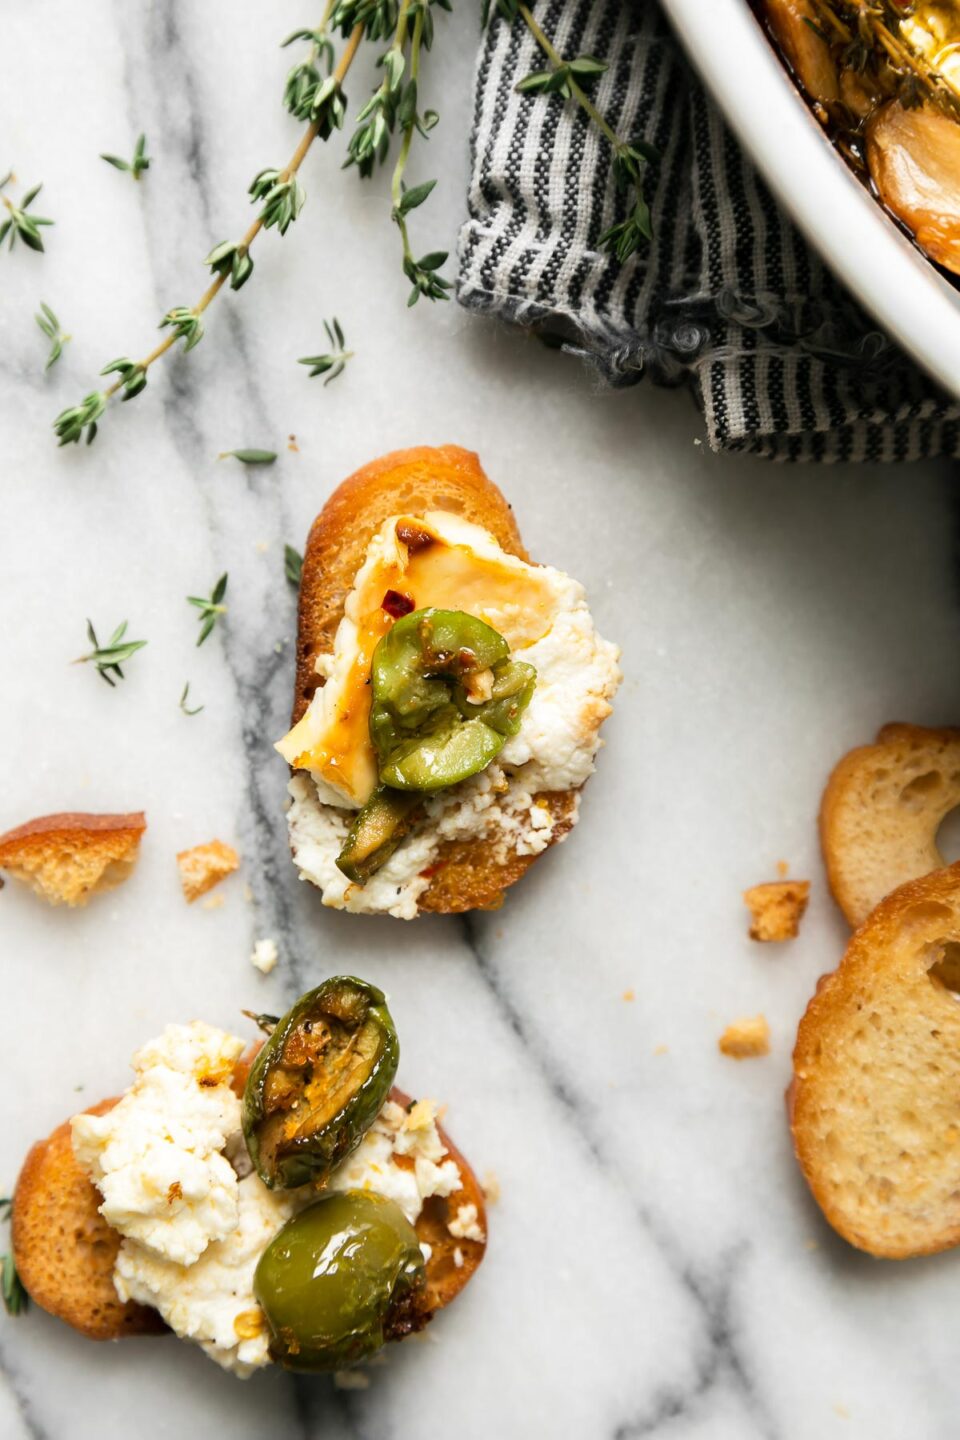 A side angle and close up shot of two crostinis topped with baked feta with Castelvetrano olives. A small white Staub baking dish is filled with baked feta with olives that rests behind the crostini atop a blue and white striped linen napkin that sits atop a gray and white marble surface. Sprigs of fresh thyme and crostini pieces surround the baking dish and prepared crostini.